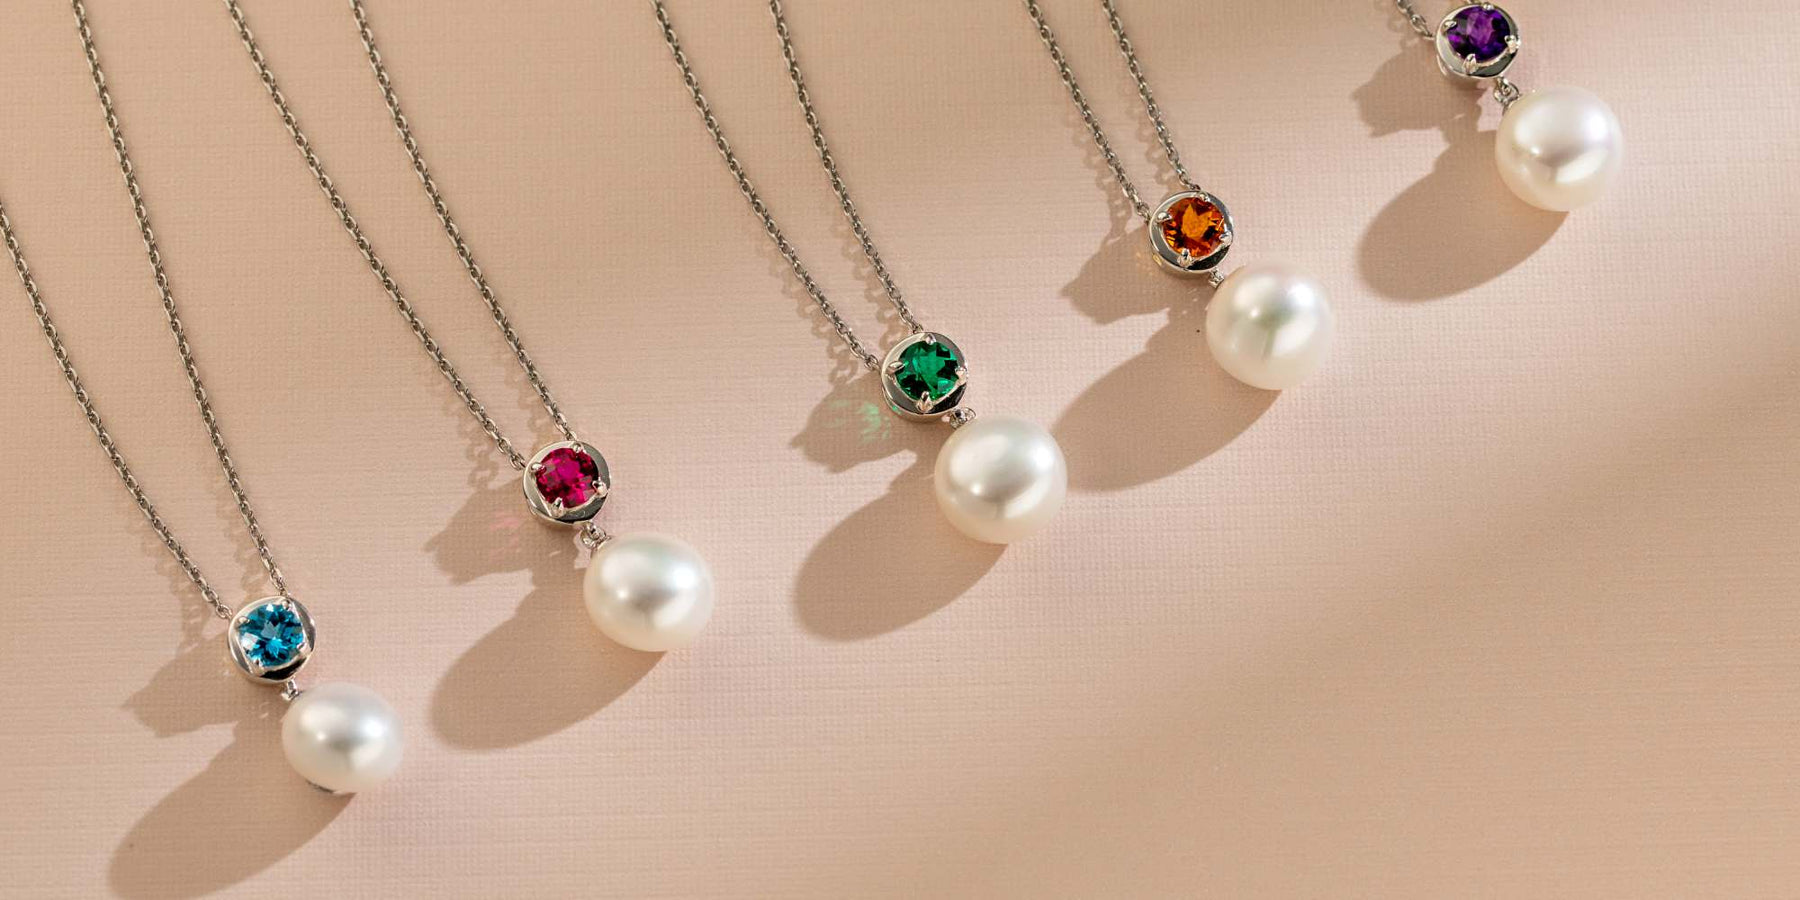 Pearl and Birthstone Pendant jewelry in sterling silver